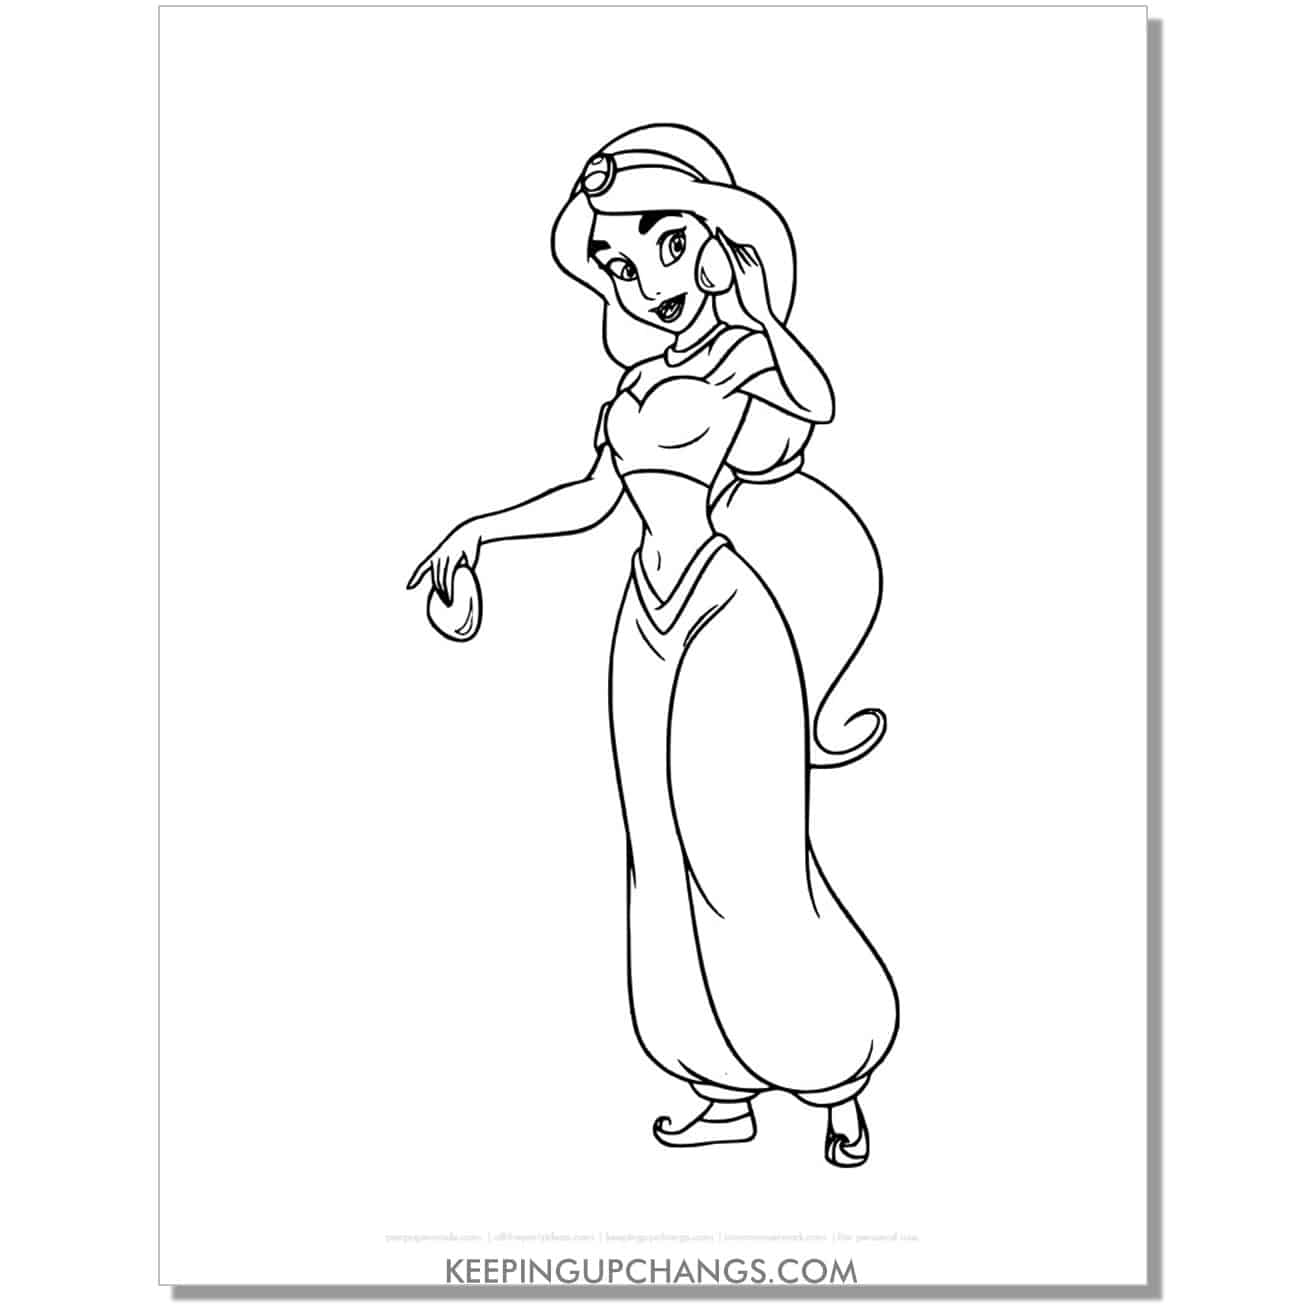 jasmine putting on earrings coloring page, sheet.